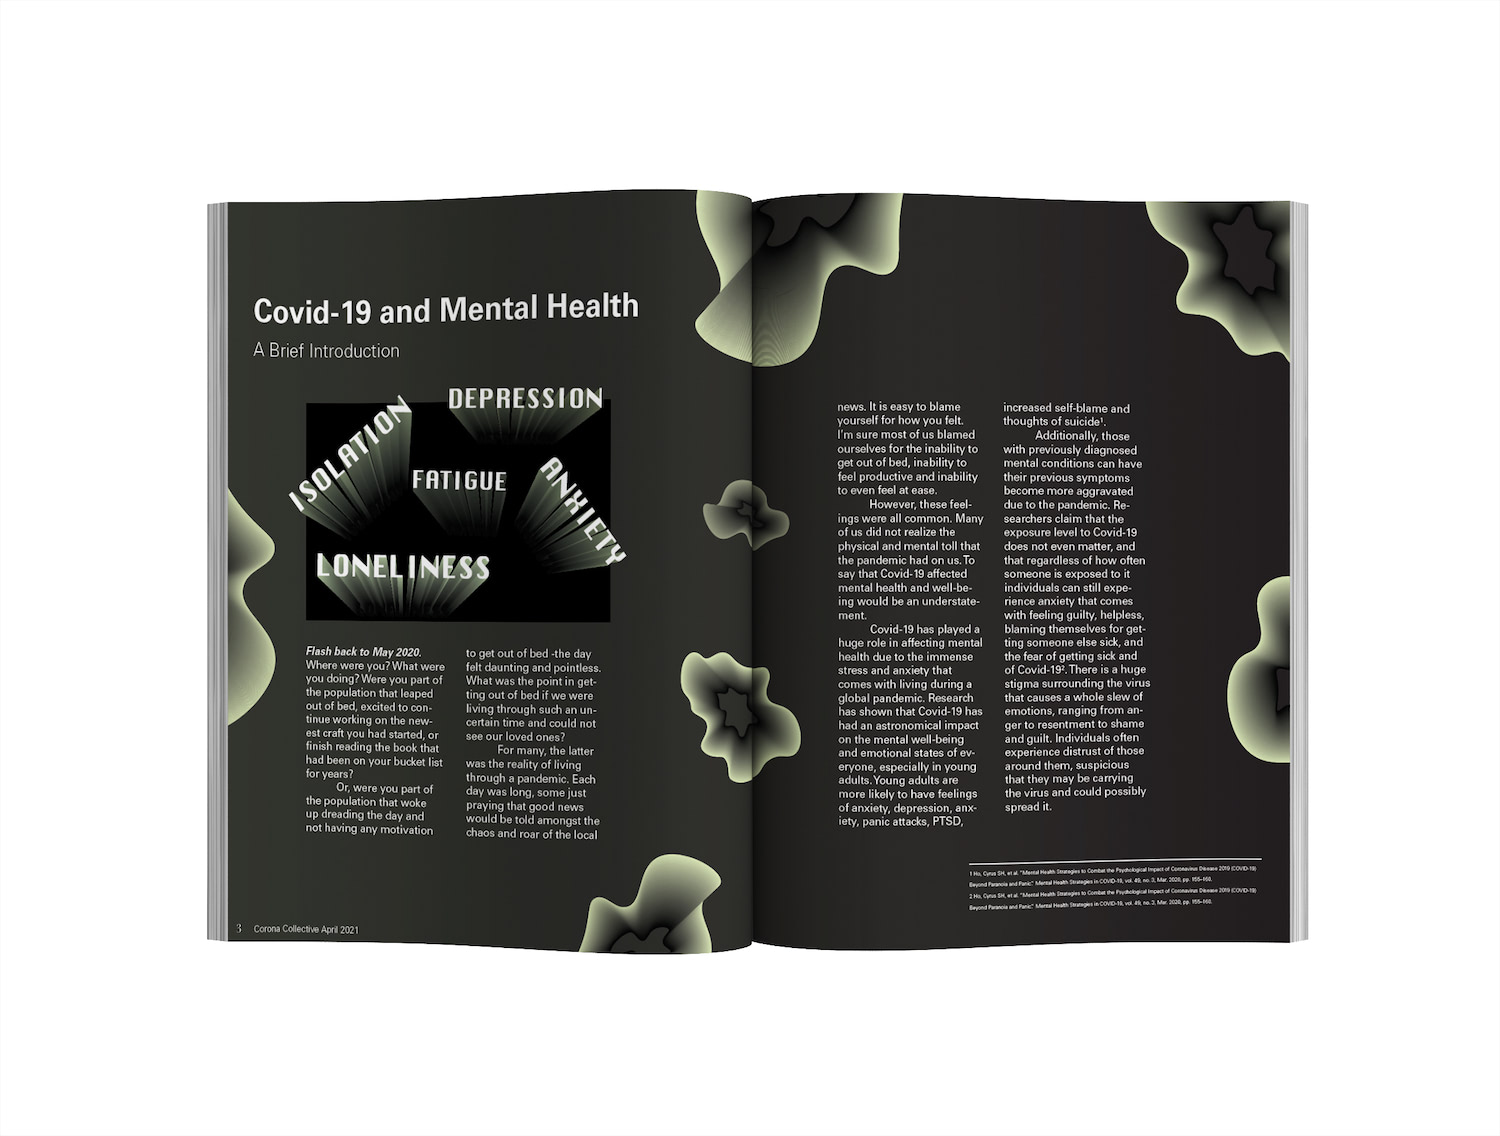 An article written about how Covid-19 has affected mental health with evidence from research. The white text is laid on a gradient dark green to black background with some lighter green organic ribbon shapes floating in the background.